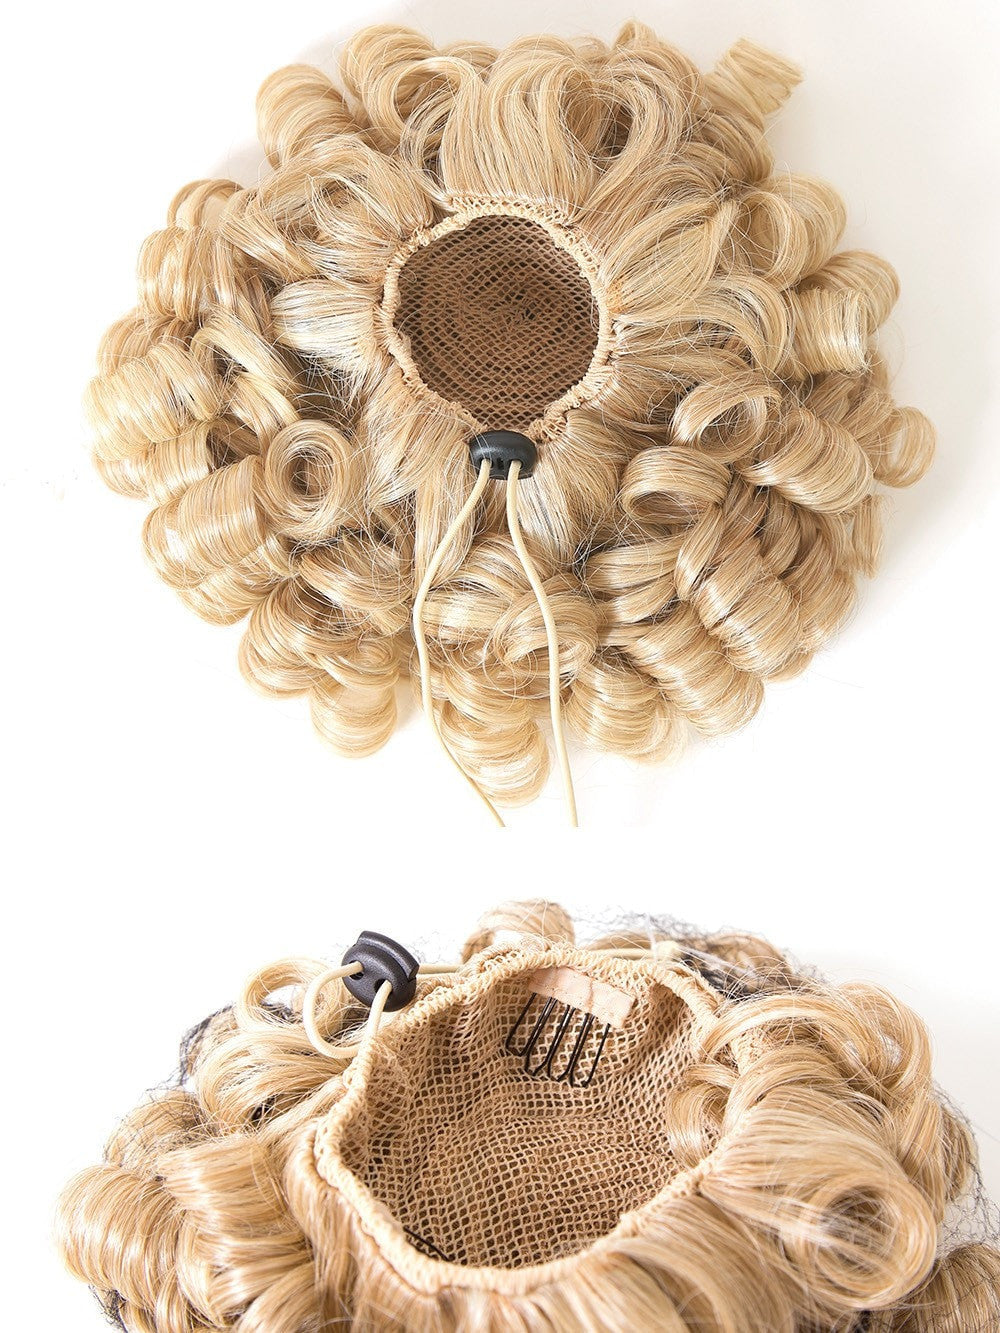 15" long, spiral curl, drawstring pocket 'pony' with three 4-prong combs for secure attachment.